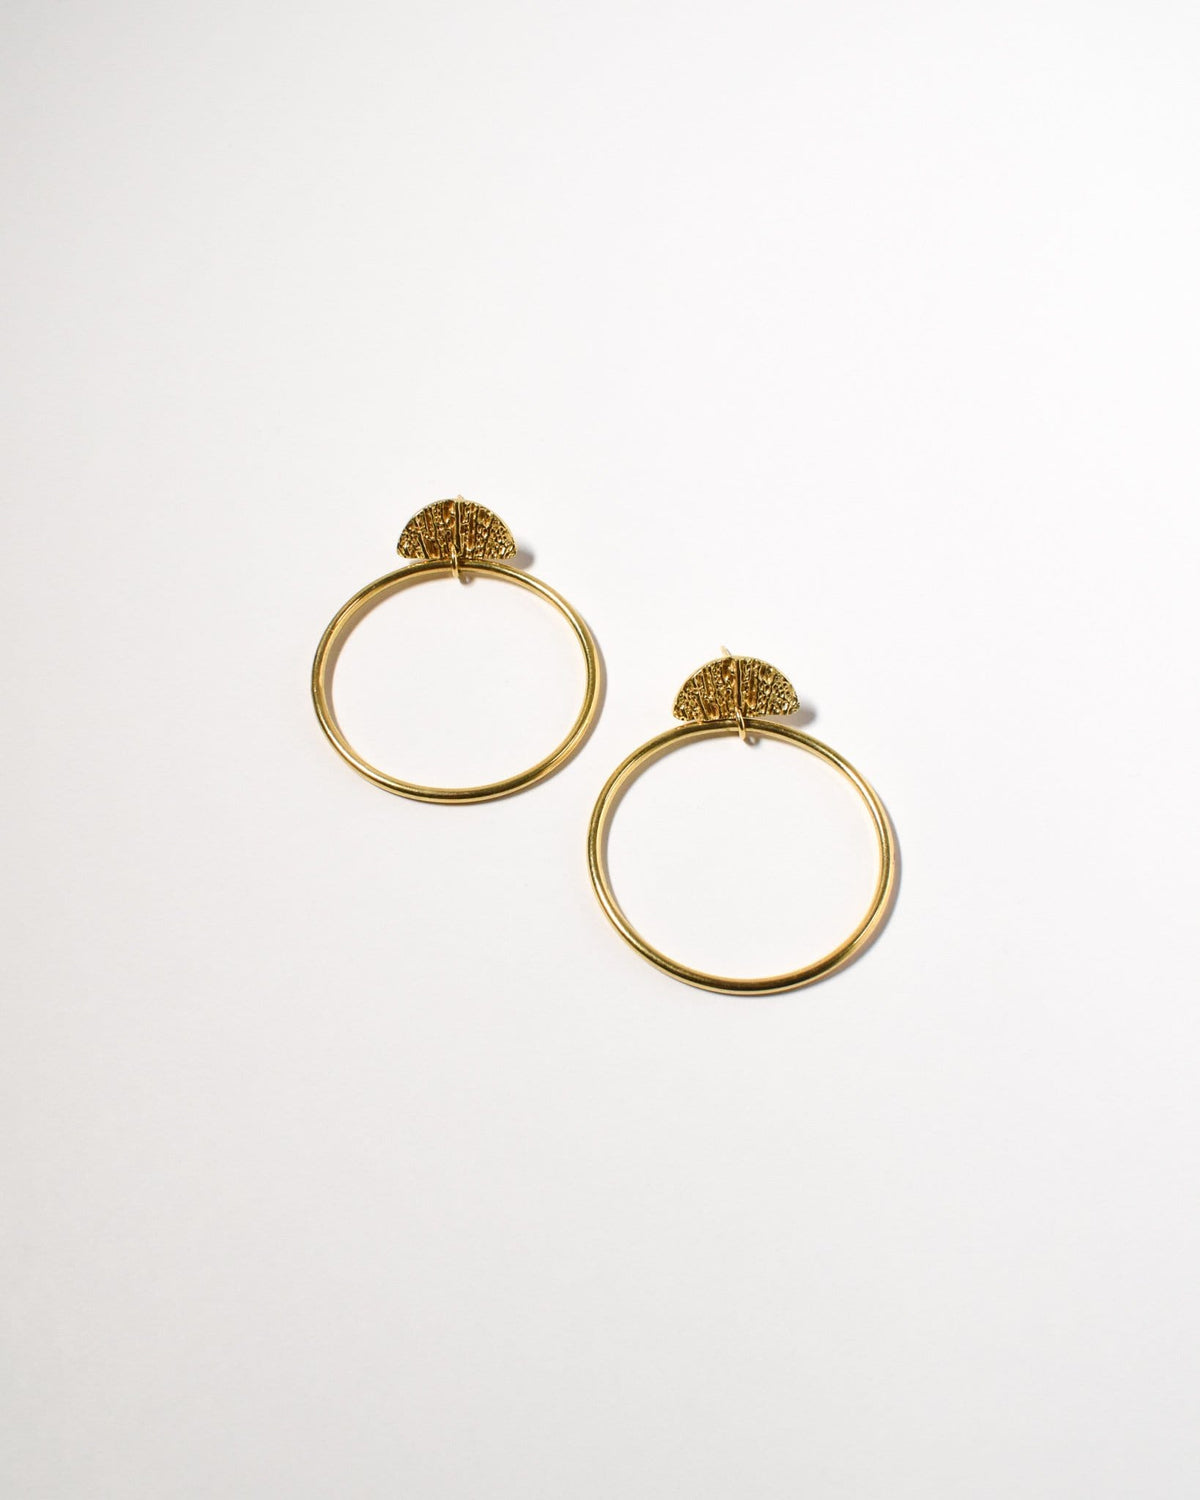 Palm Earrings, Yellow Gold Plated